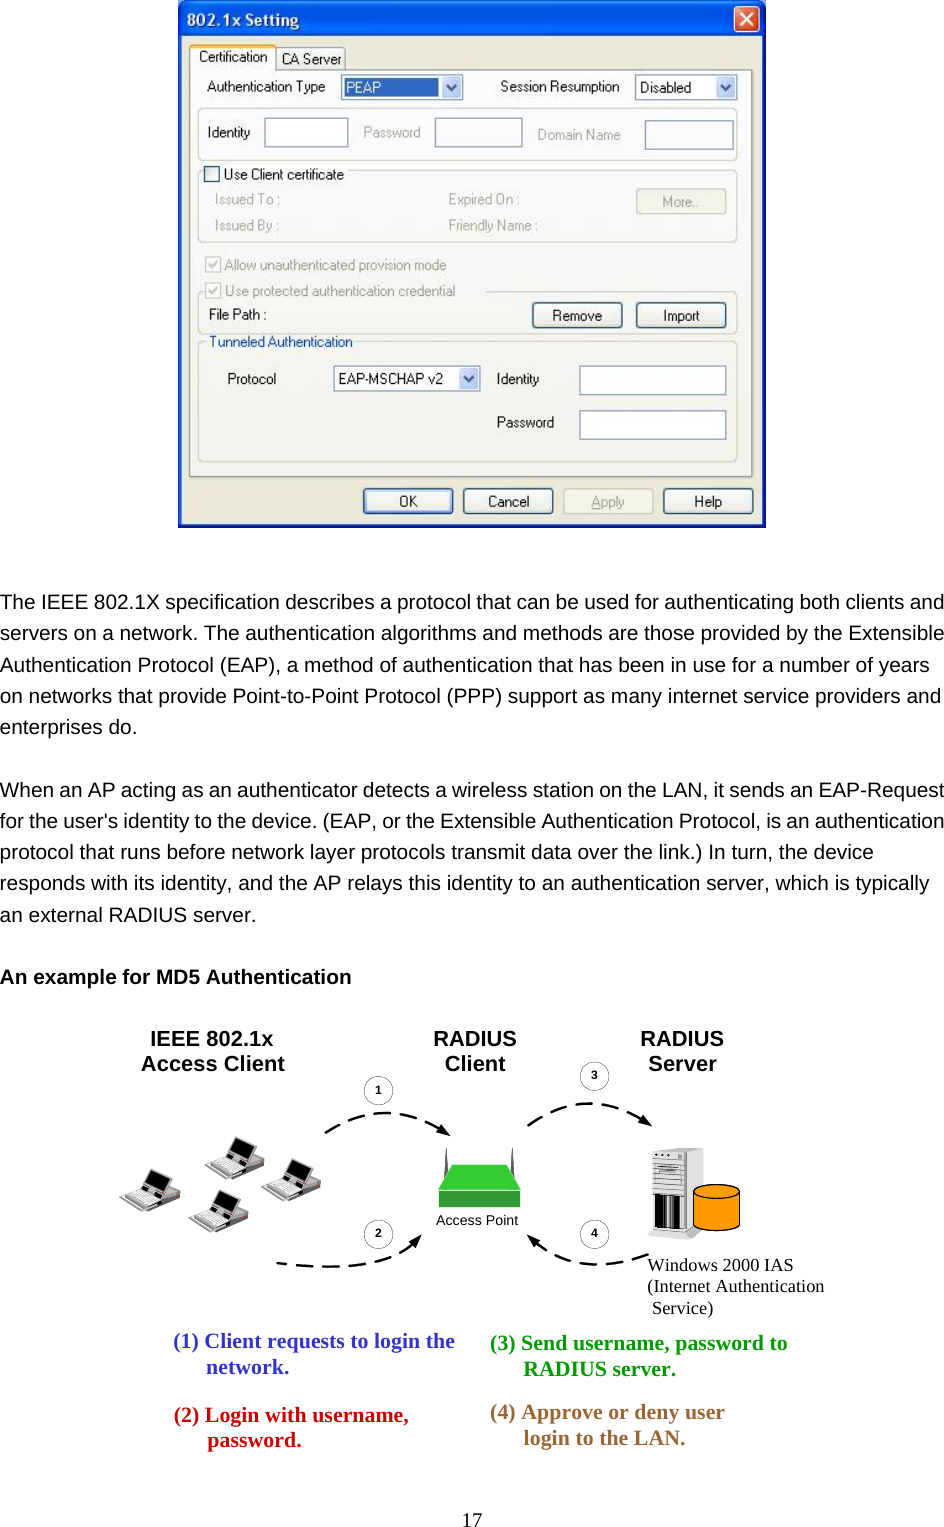  17    The IEEE 802.1X specification describes a protocol that can be used for authenticating both clients and servers on a network. The authentication algorithms and methods are those provided by the Extensible Authentication Protocol (EAP), a method of authentication that has been in use for a number of years on networks that provide Point-to-Point Protocol (PPP) support as many internet service providers and enterprises do.     When an AP acting as an authenticator detects a wireless station on the LAN, it sends an EAP-Request for the user&apos;s identity to the device. (EAP, or the Extensible Authentication Protocol, is an authentication protocol that runs before network layer protocols transmit data over the link.) In turn, the device responds with its identity, and the AP relays this identity to an authentication server, which is typically an external RADIUS server.  An example for MD5 Authentication  RADIUSServerWindows 2000 IAS(Internet AuthenticationService)IEEE 802.1xAccess ClientAccess PointRADIUSClient1234(2) Login with username,password.(1) Client requests to login the      network.(4) Approve or deny userlogin to the LAN.(3) Send username, password to      RADIUS server. 